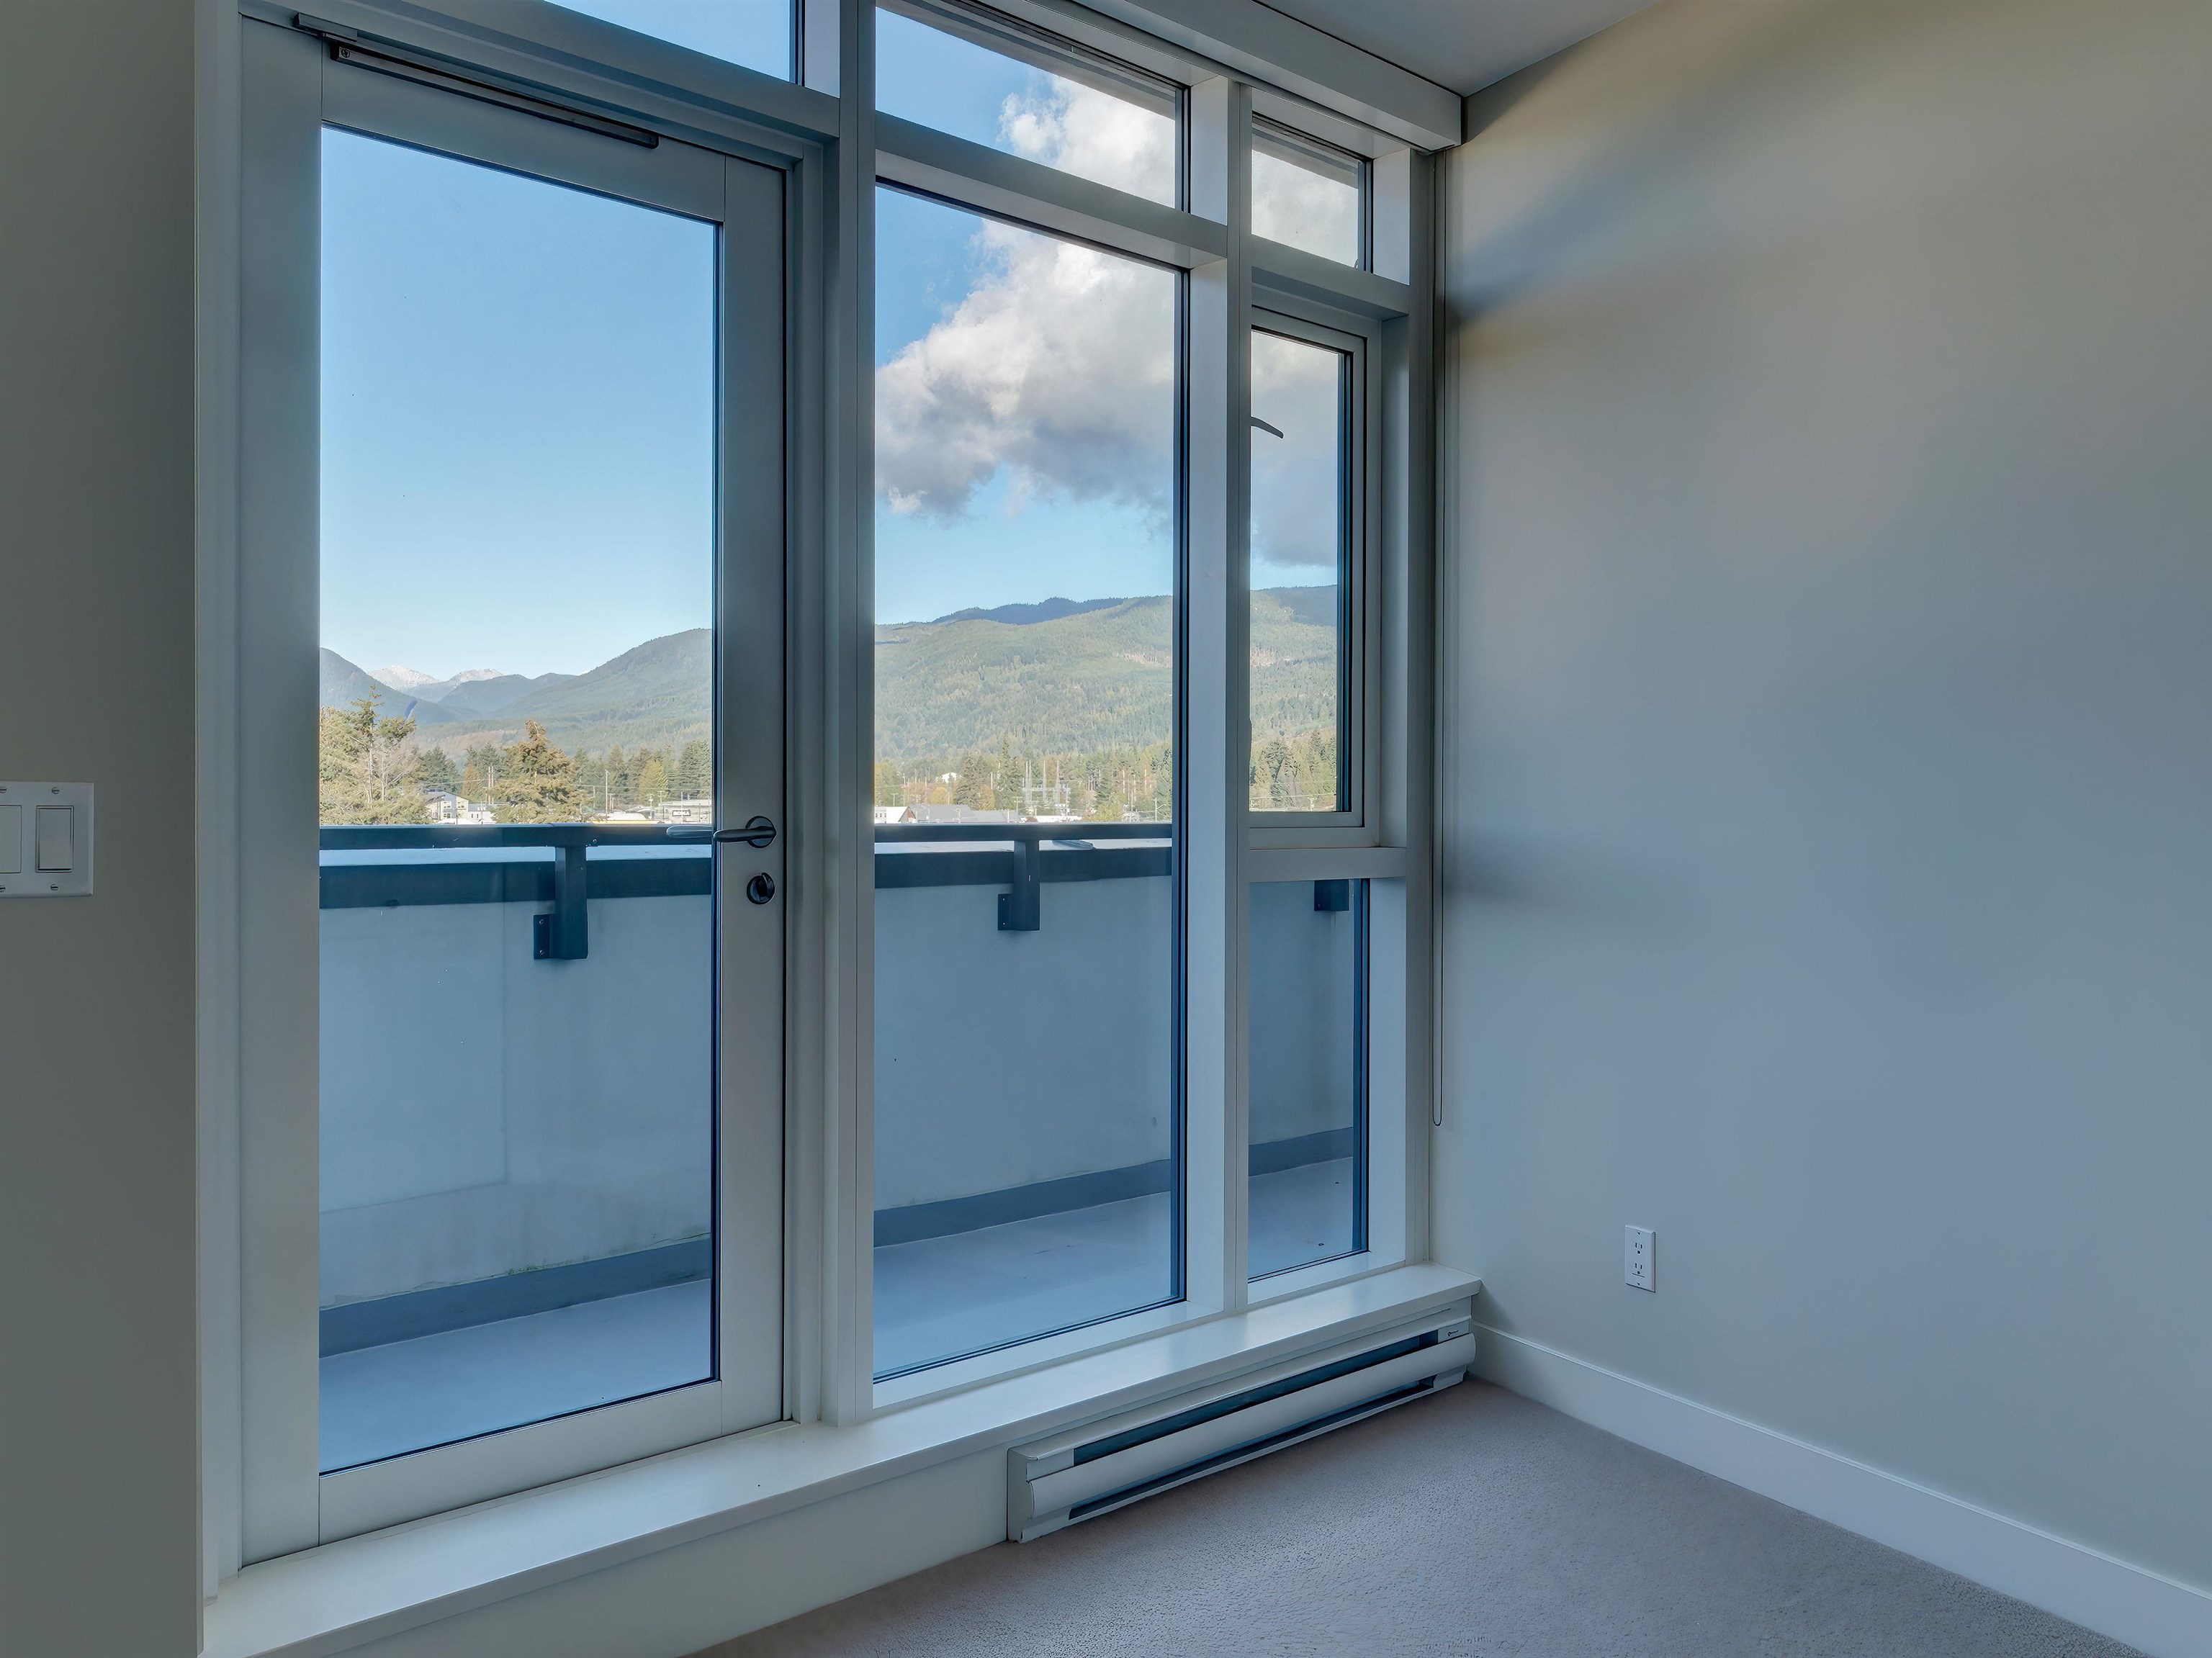 The spacious Master bedroom also enjoys deck access, mountain views, plenty of natural light, walk-in-closet and large five piece en-suite.